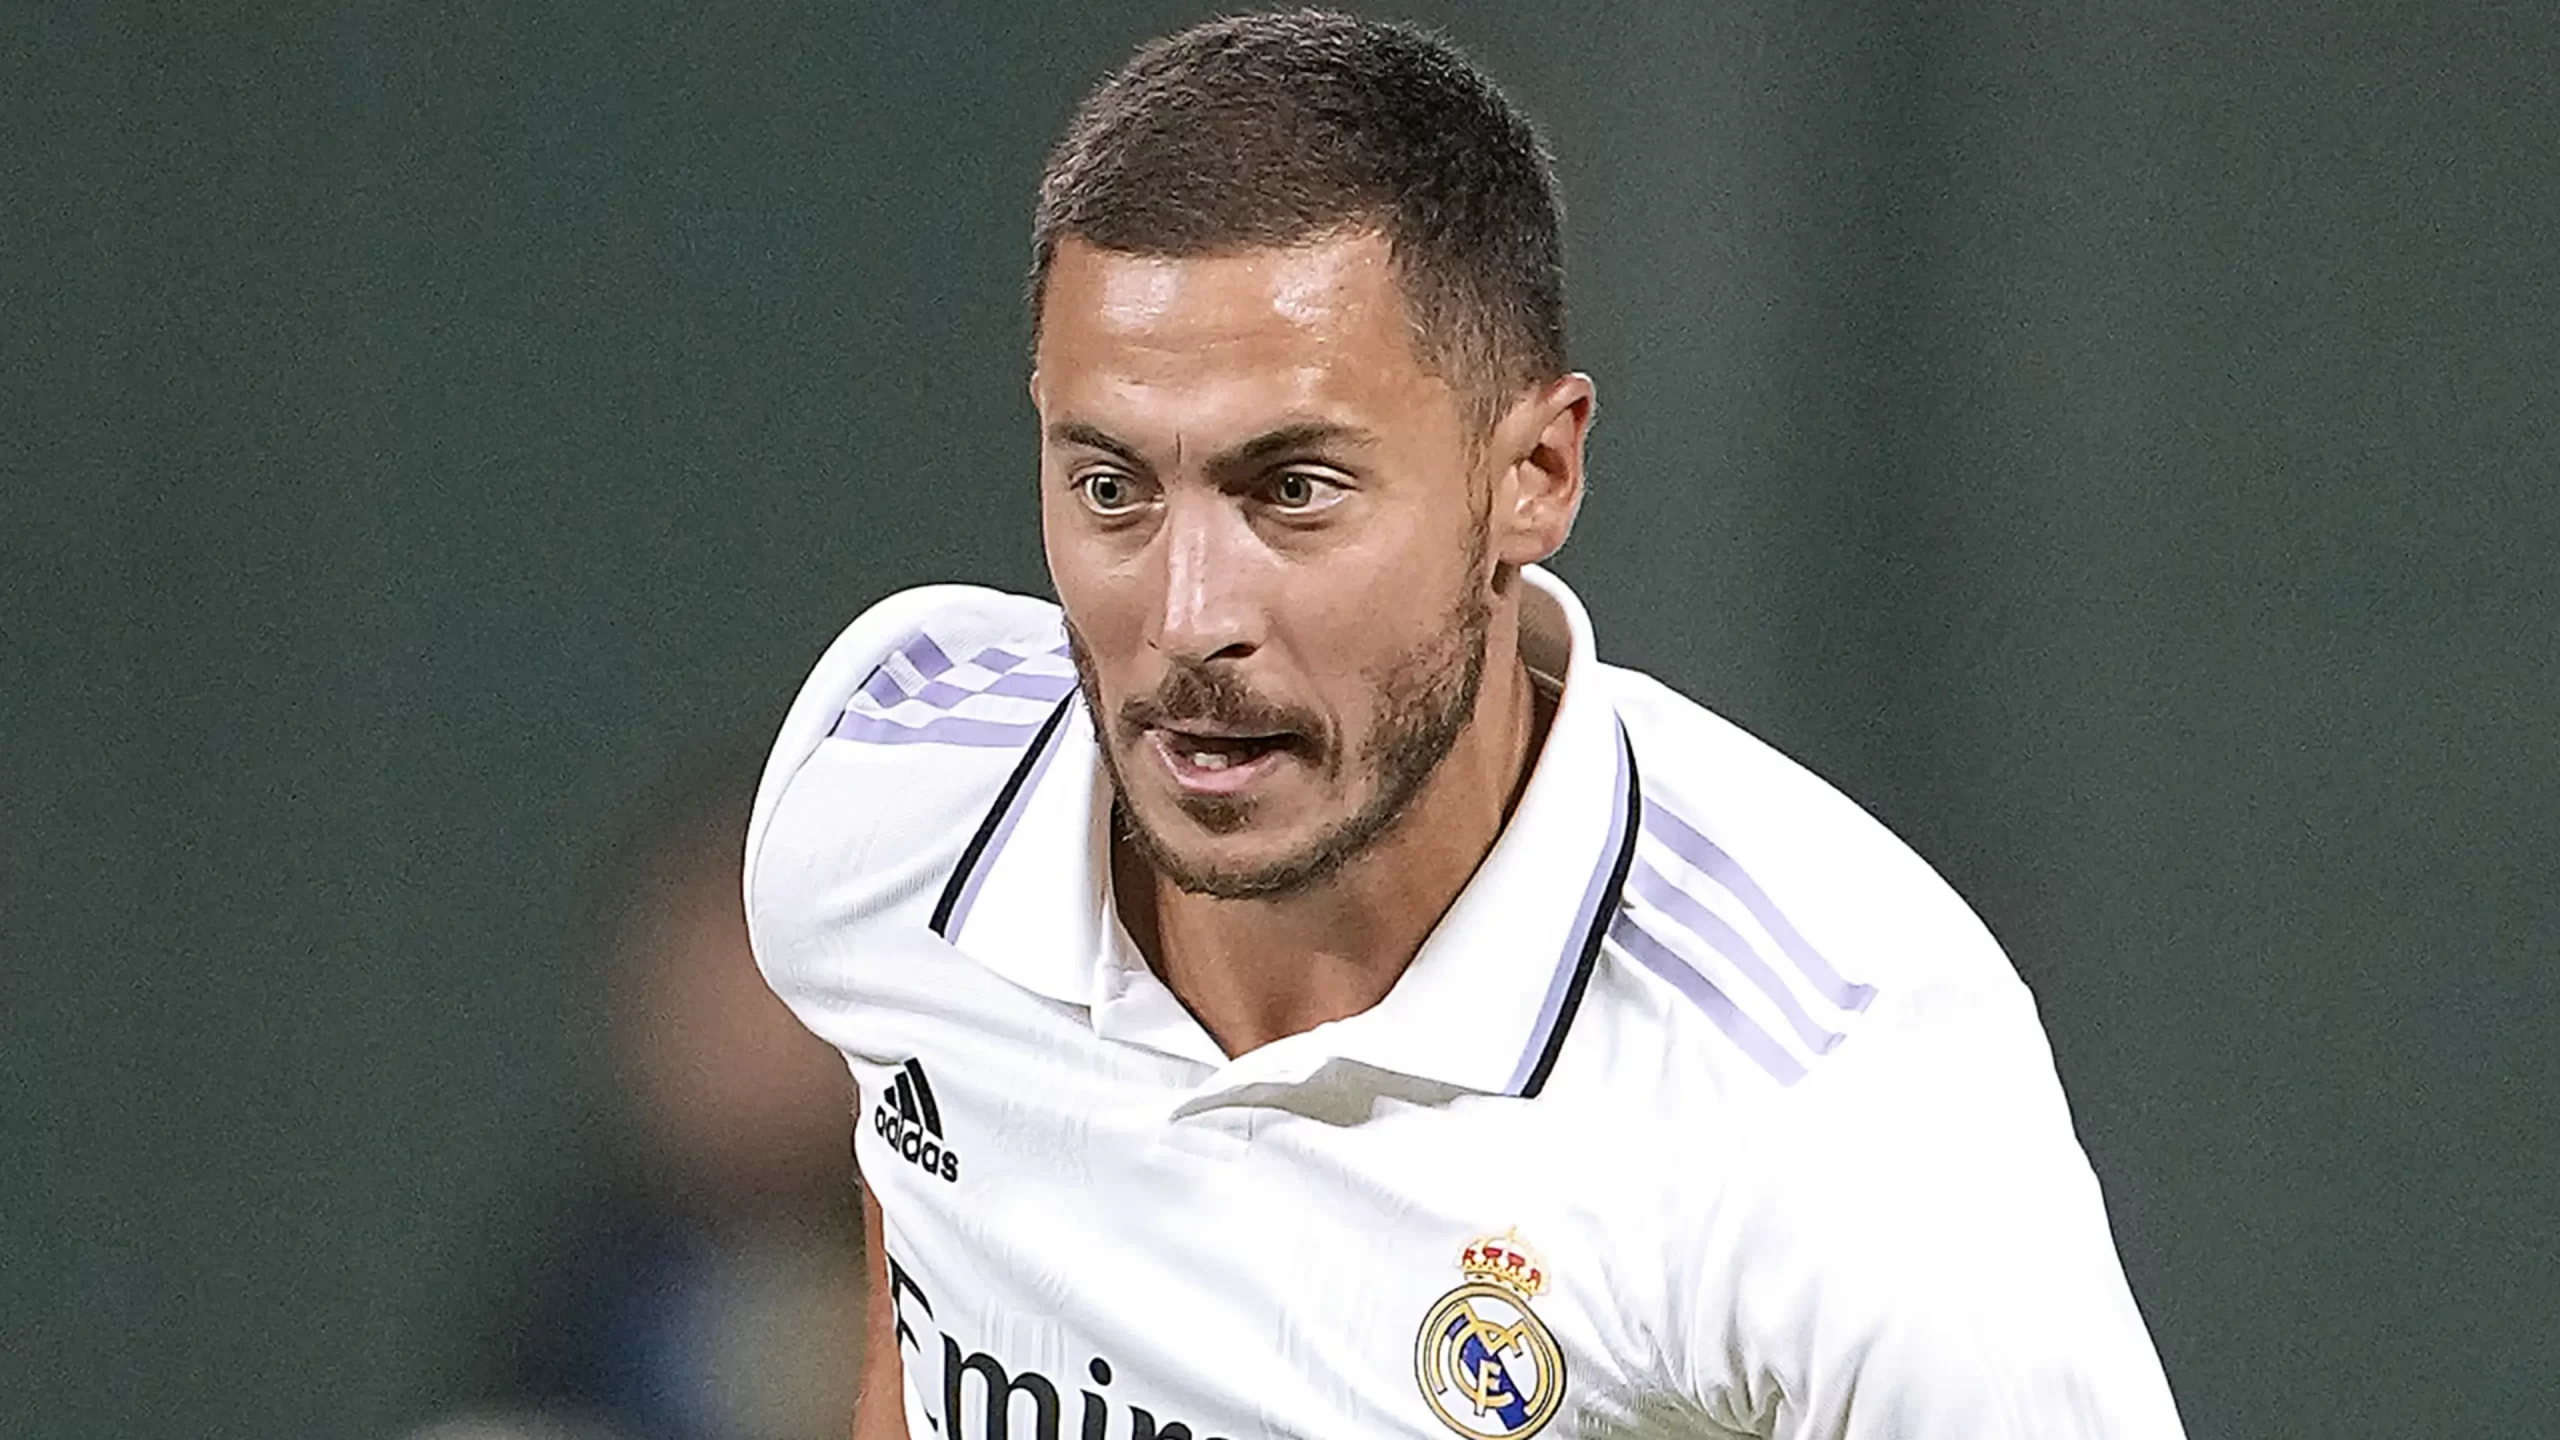 Retirement on the card for Eden Hazard as he leaves Real Madrid